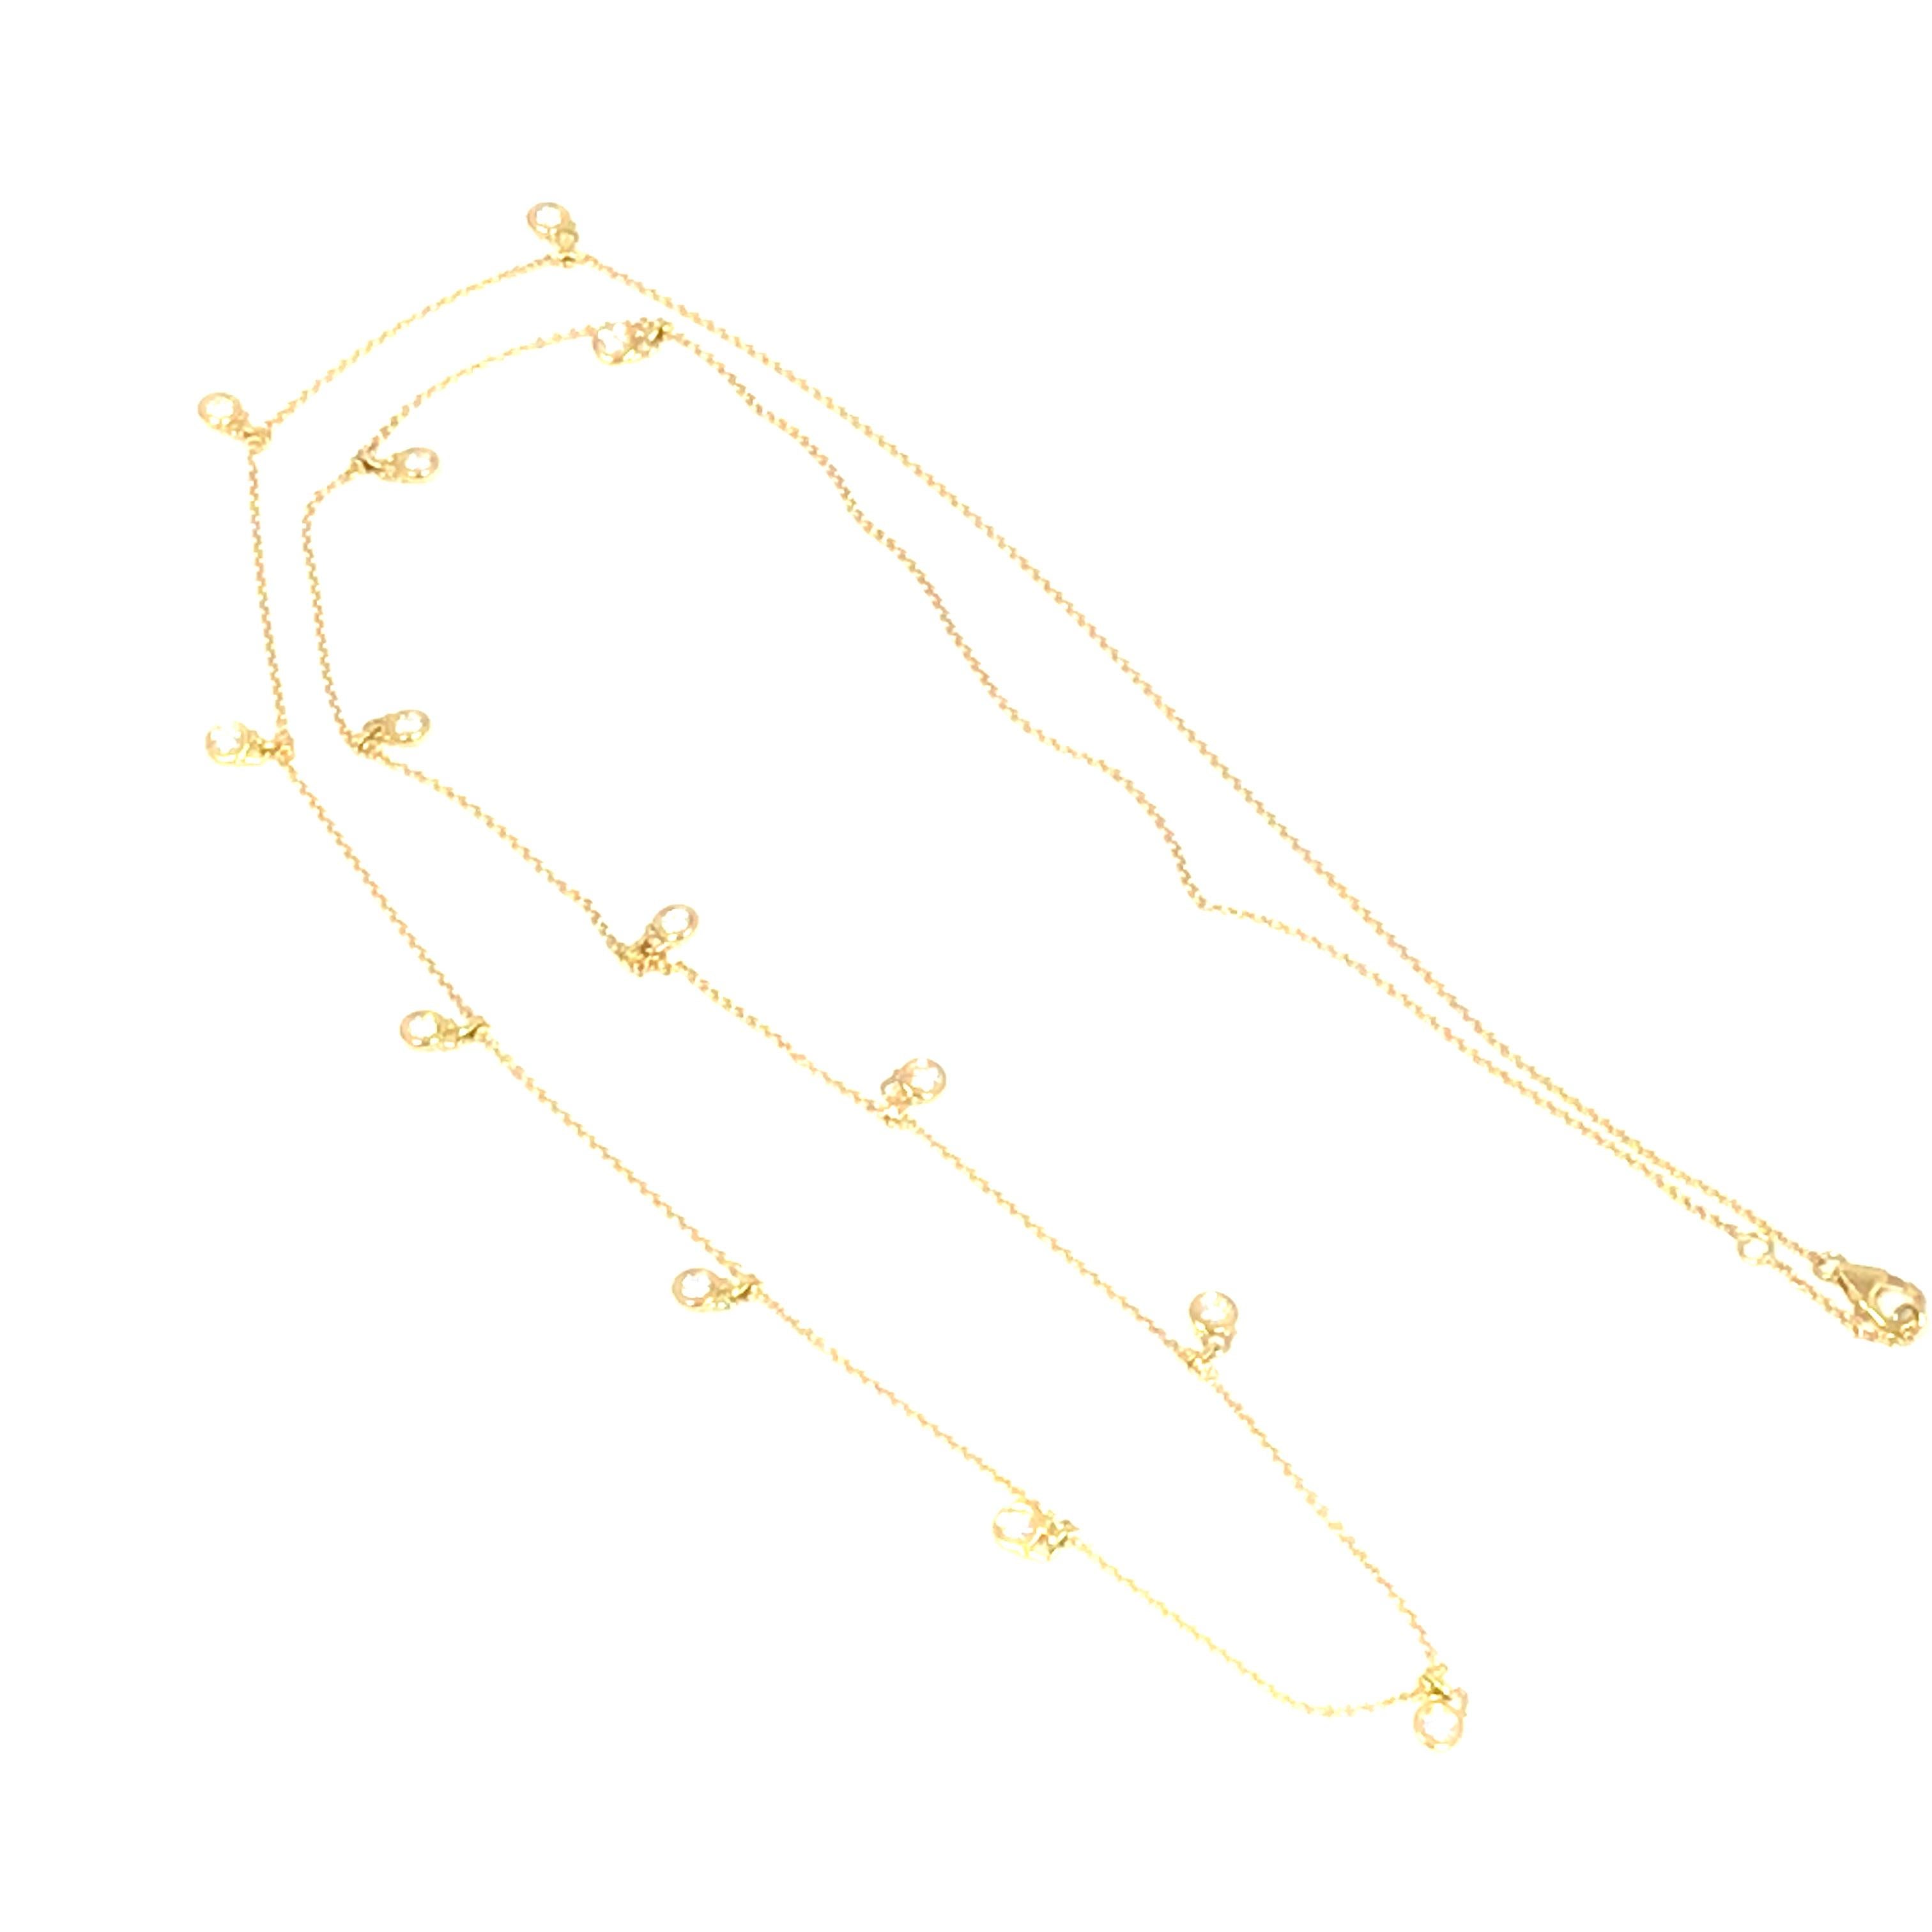 Long 36 inch Diamond-by-the-Yard Necklace with Dangles in 18K Yellow Gold.  (13) Round Brilliant Cut Diamonds weighing 1.25 carat total weight, G-H in color and VS-SI in clarity are bezel set in dangles along the chain.  Each dangle measures 3/8